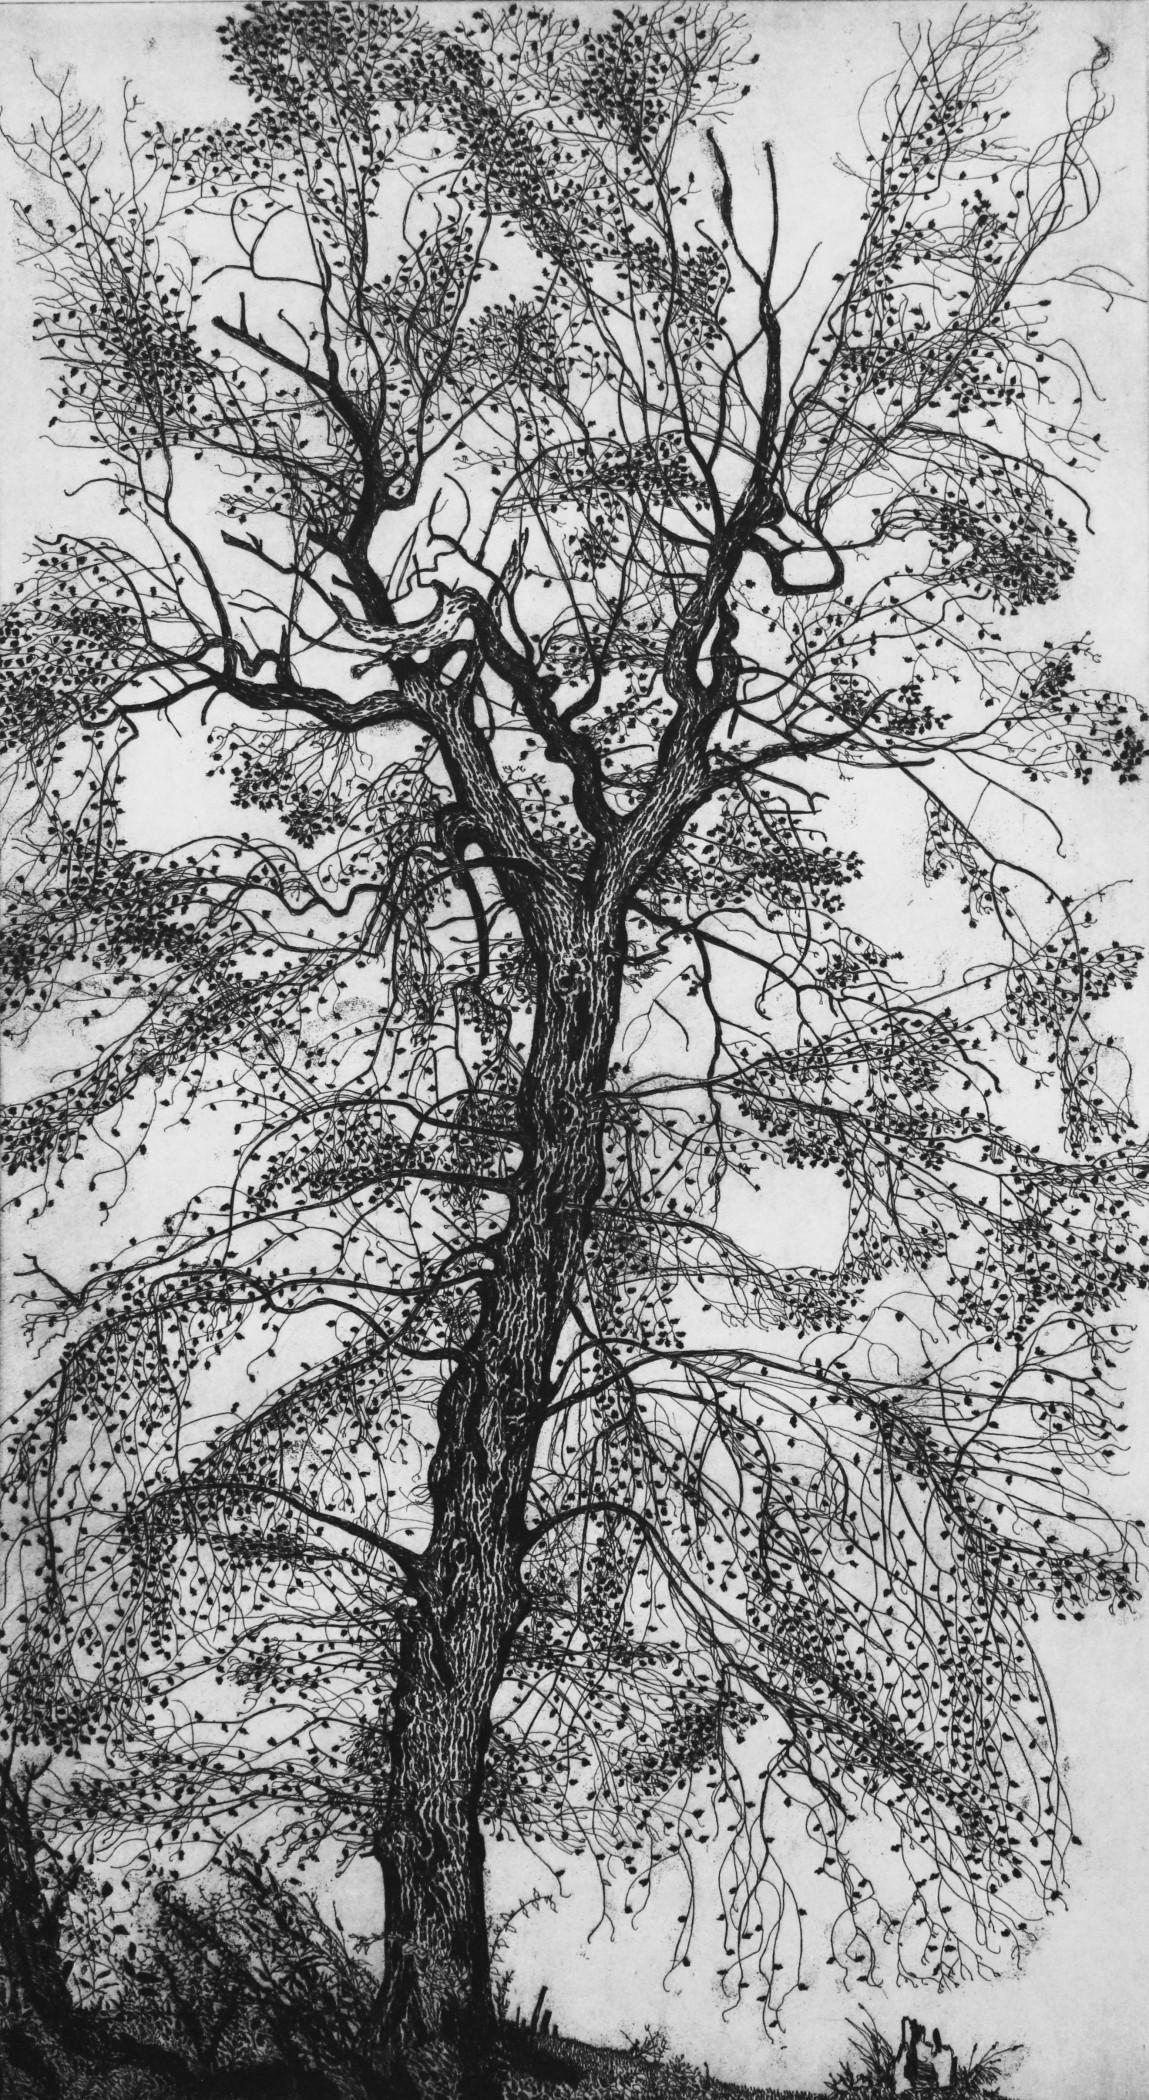 Leafed Oak, 1982, rif. 444

Etching inches 25.1 x 13.5 (mm 635 x 345). Contemporary Art

Etcher. A prominent figure of the art of engraving in Italy, Federica Galli was born in 1932 in Soresina – a village just outside Cremona. Straight after the